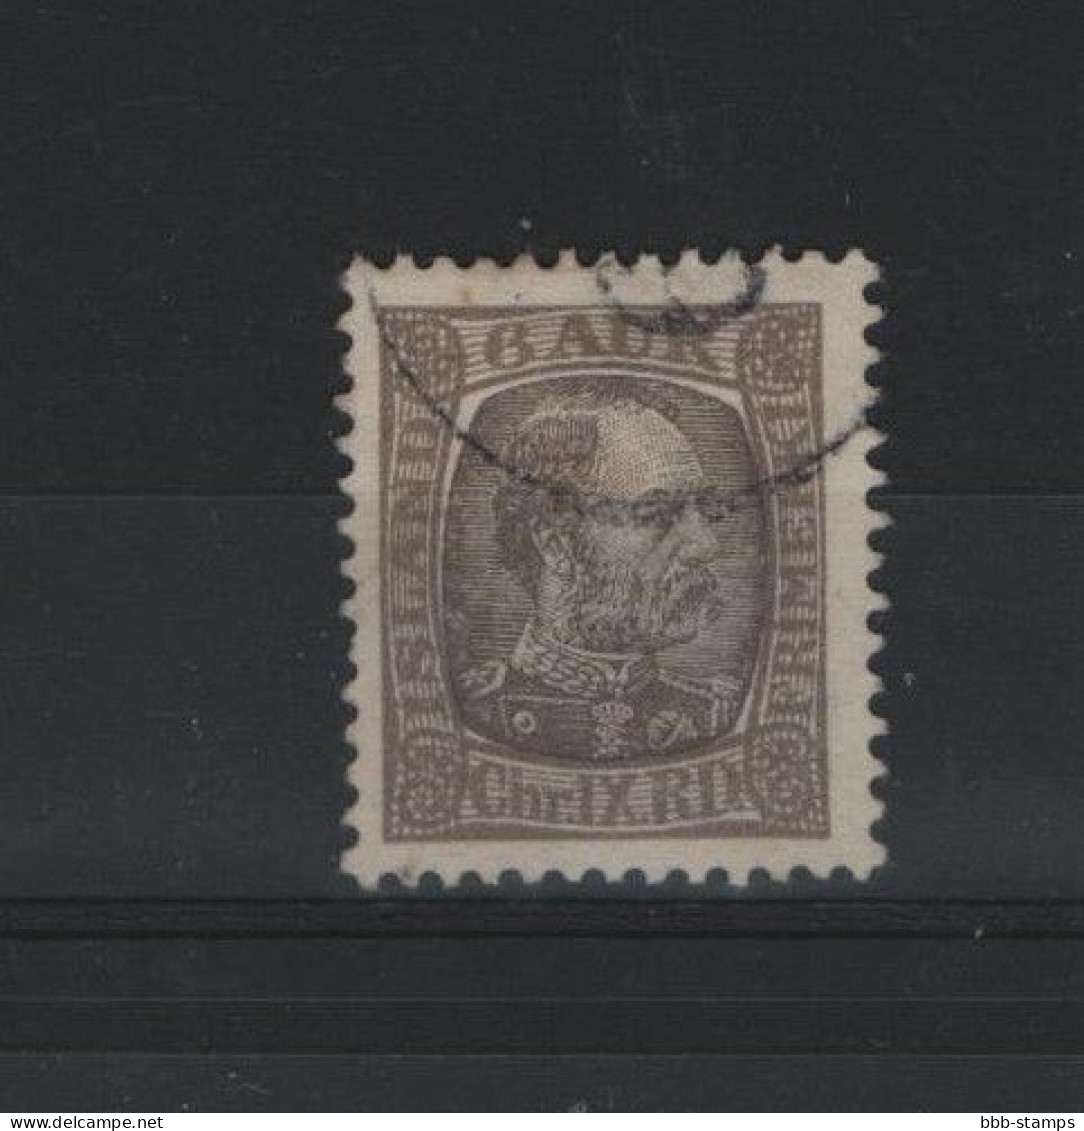 Island Michel Cat.No. Used 38 (3) - Used Stamps